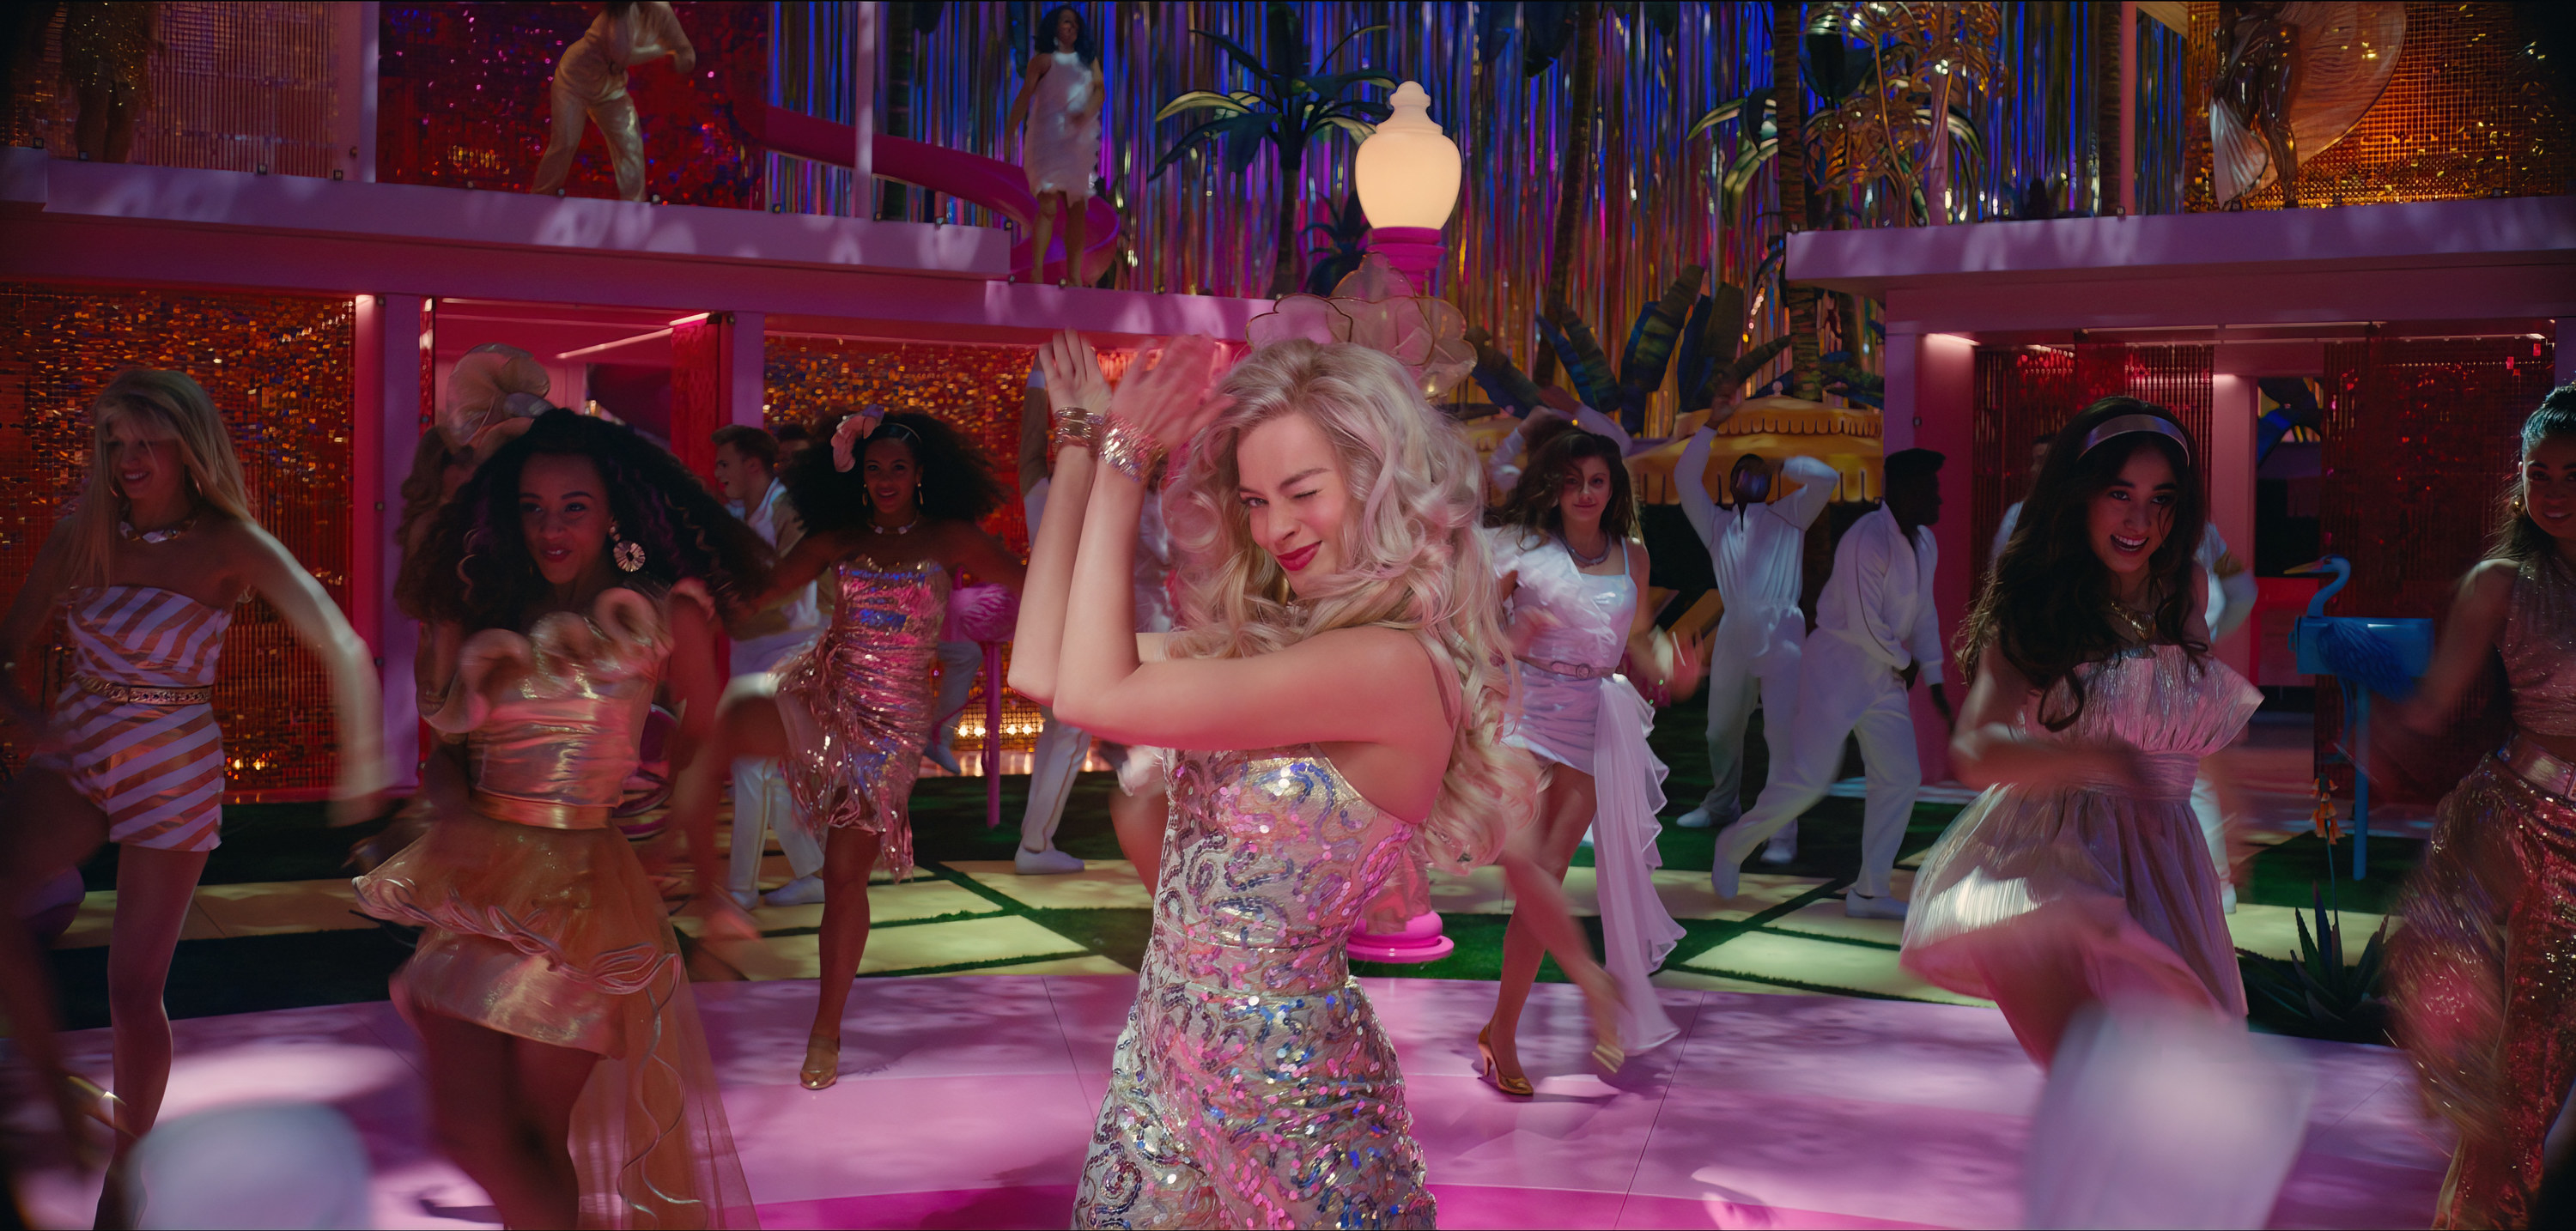 Margot dancing with others as Barbie